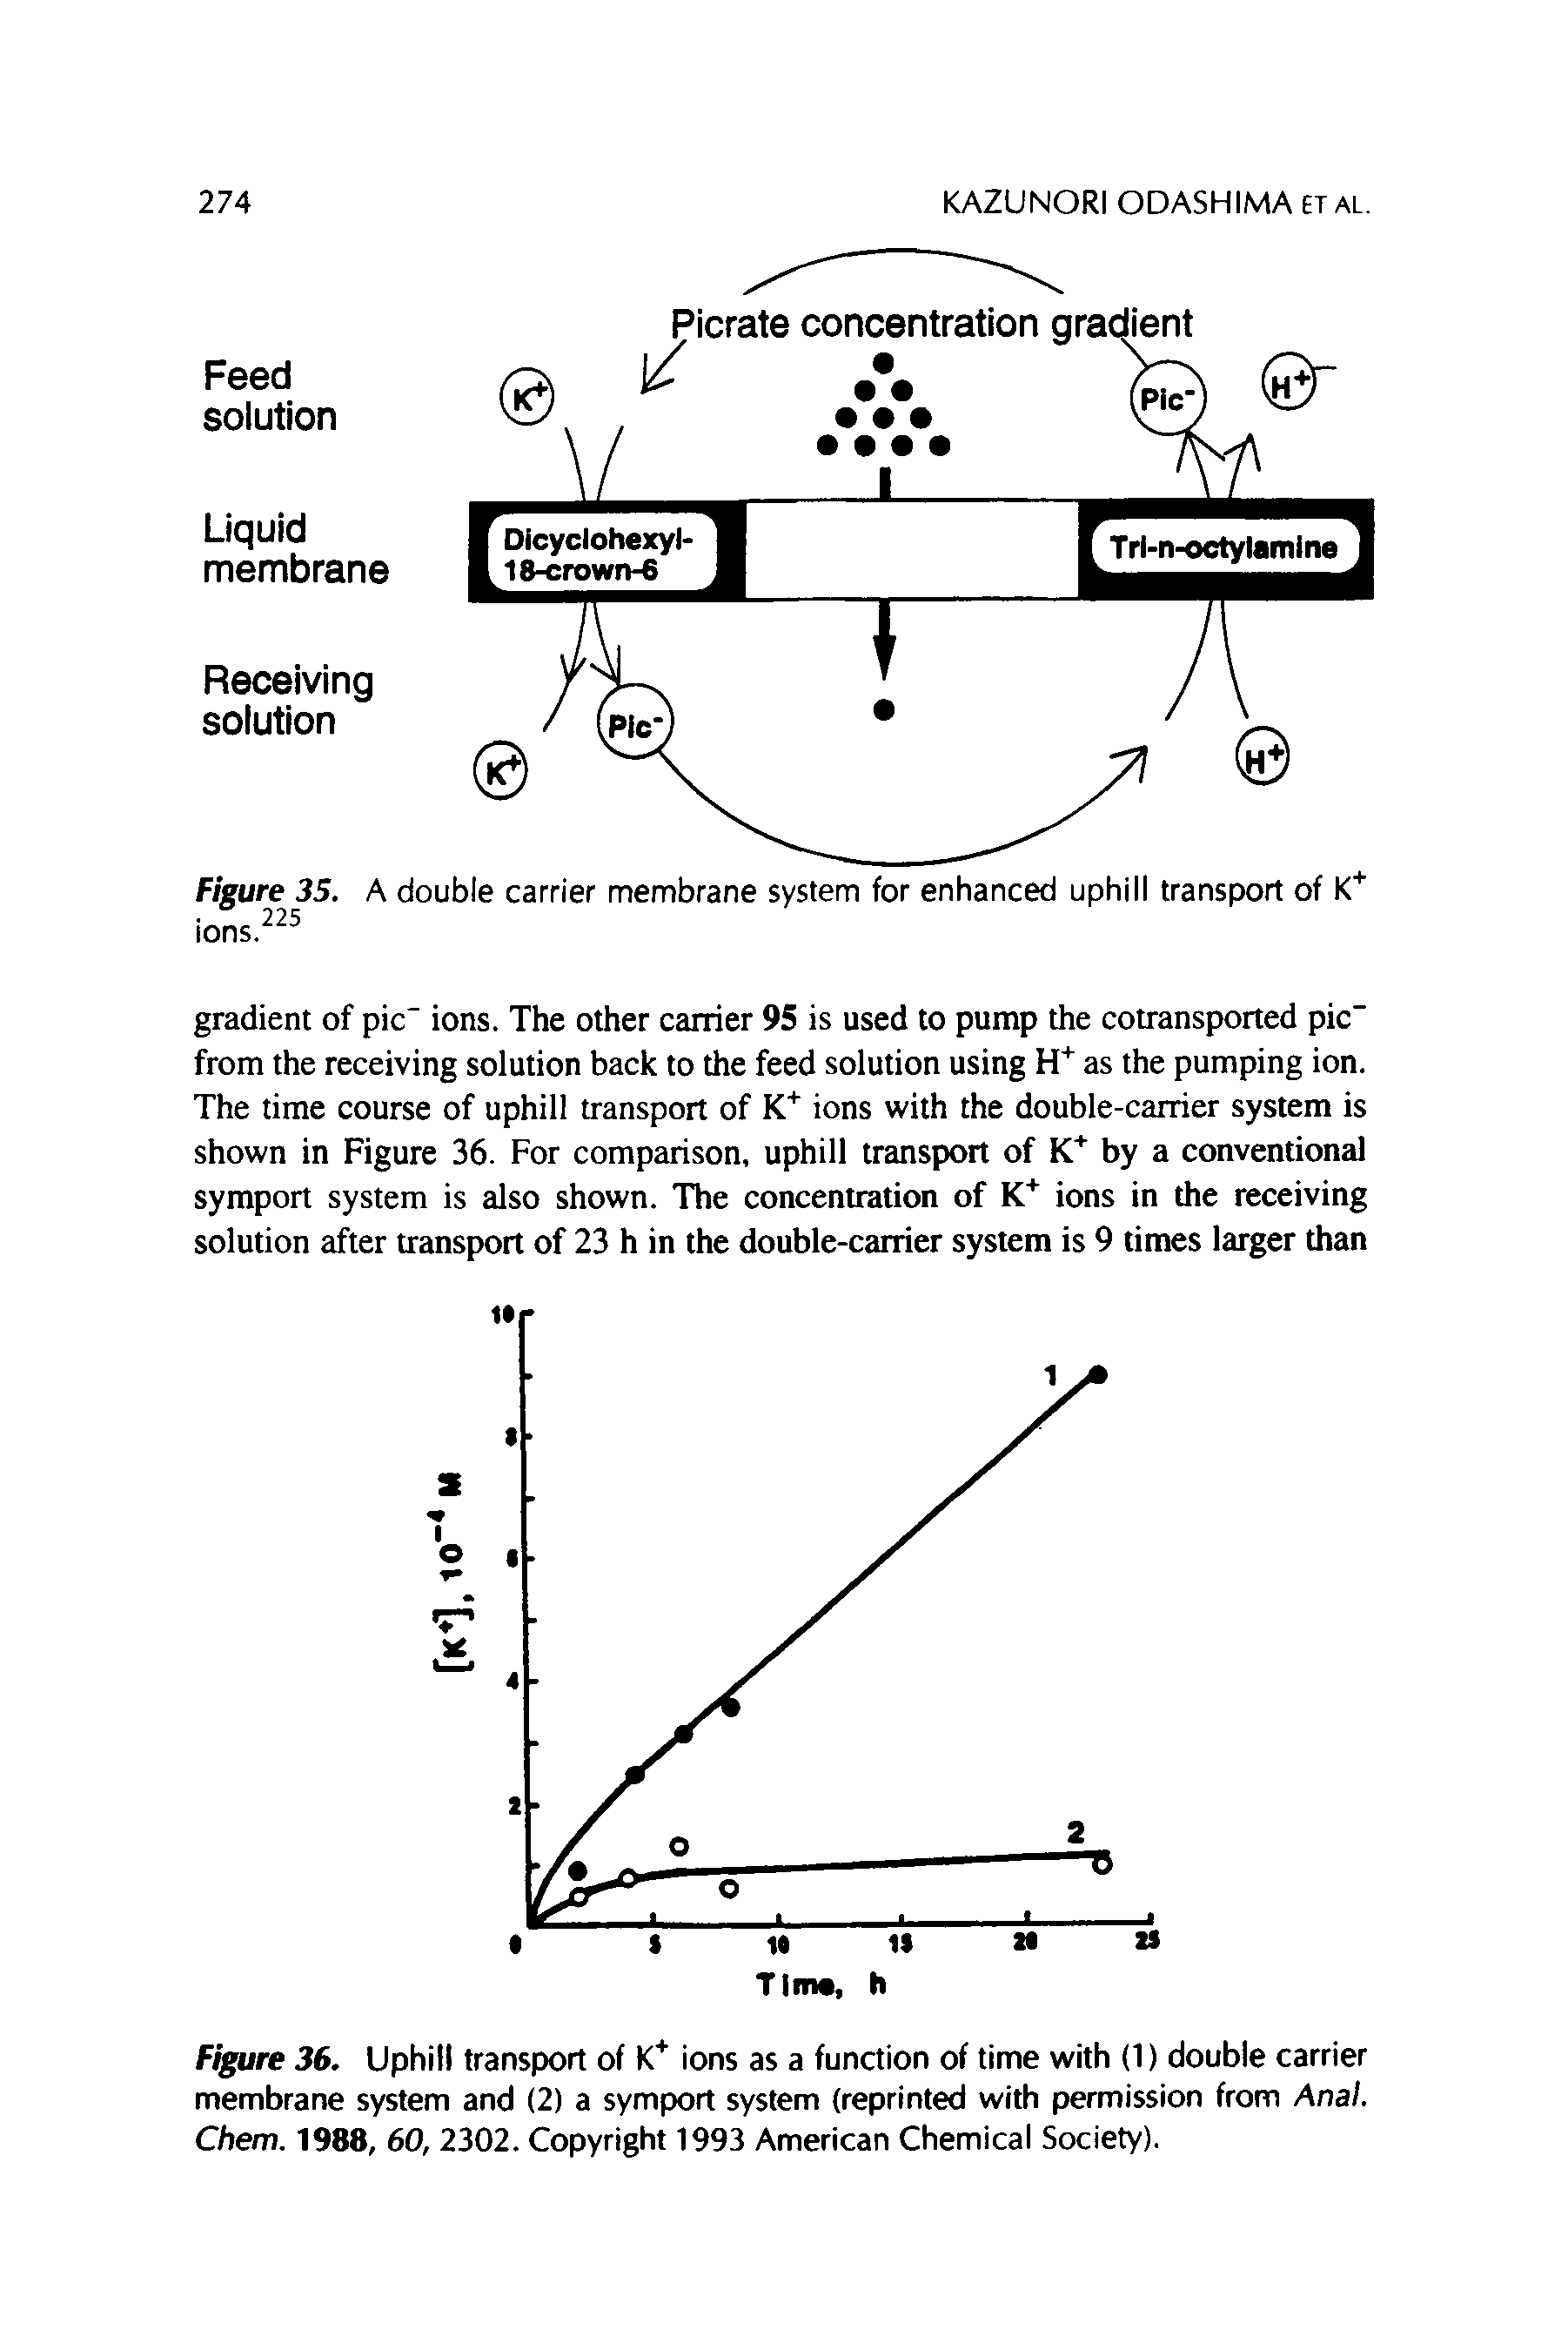 Figure 36. Uphill transport of K ions as a function of time with (1) double carrier membrane system and (2) a symport system (reprinted with permission from Anal. Chem. 1988, 60, 2302. Copyright 1993 American Chemical Society).